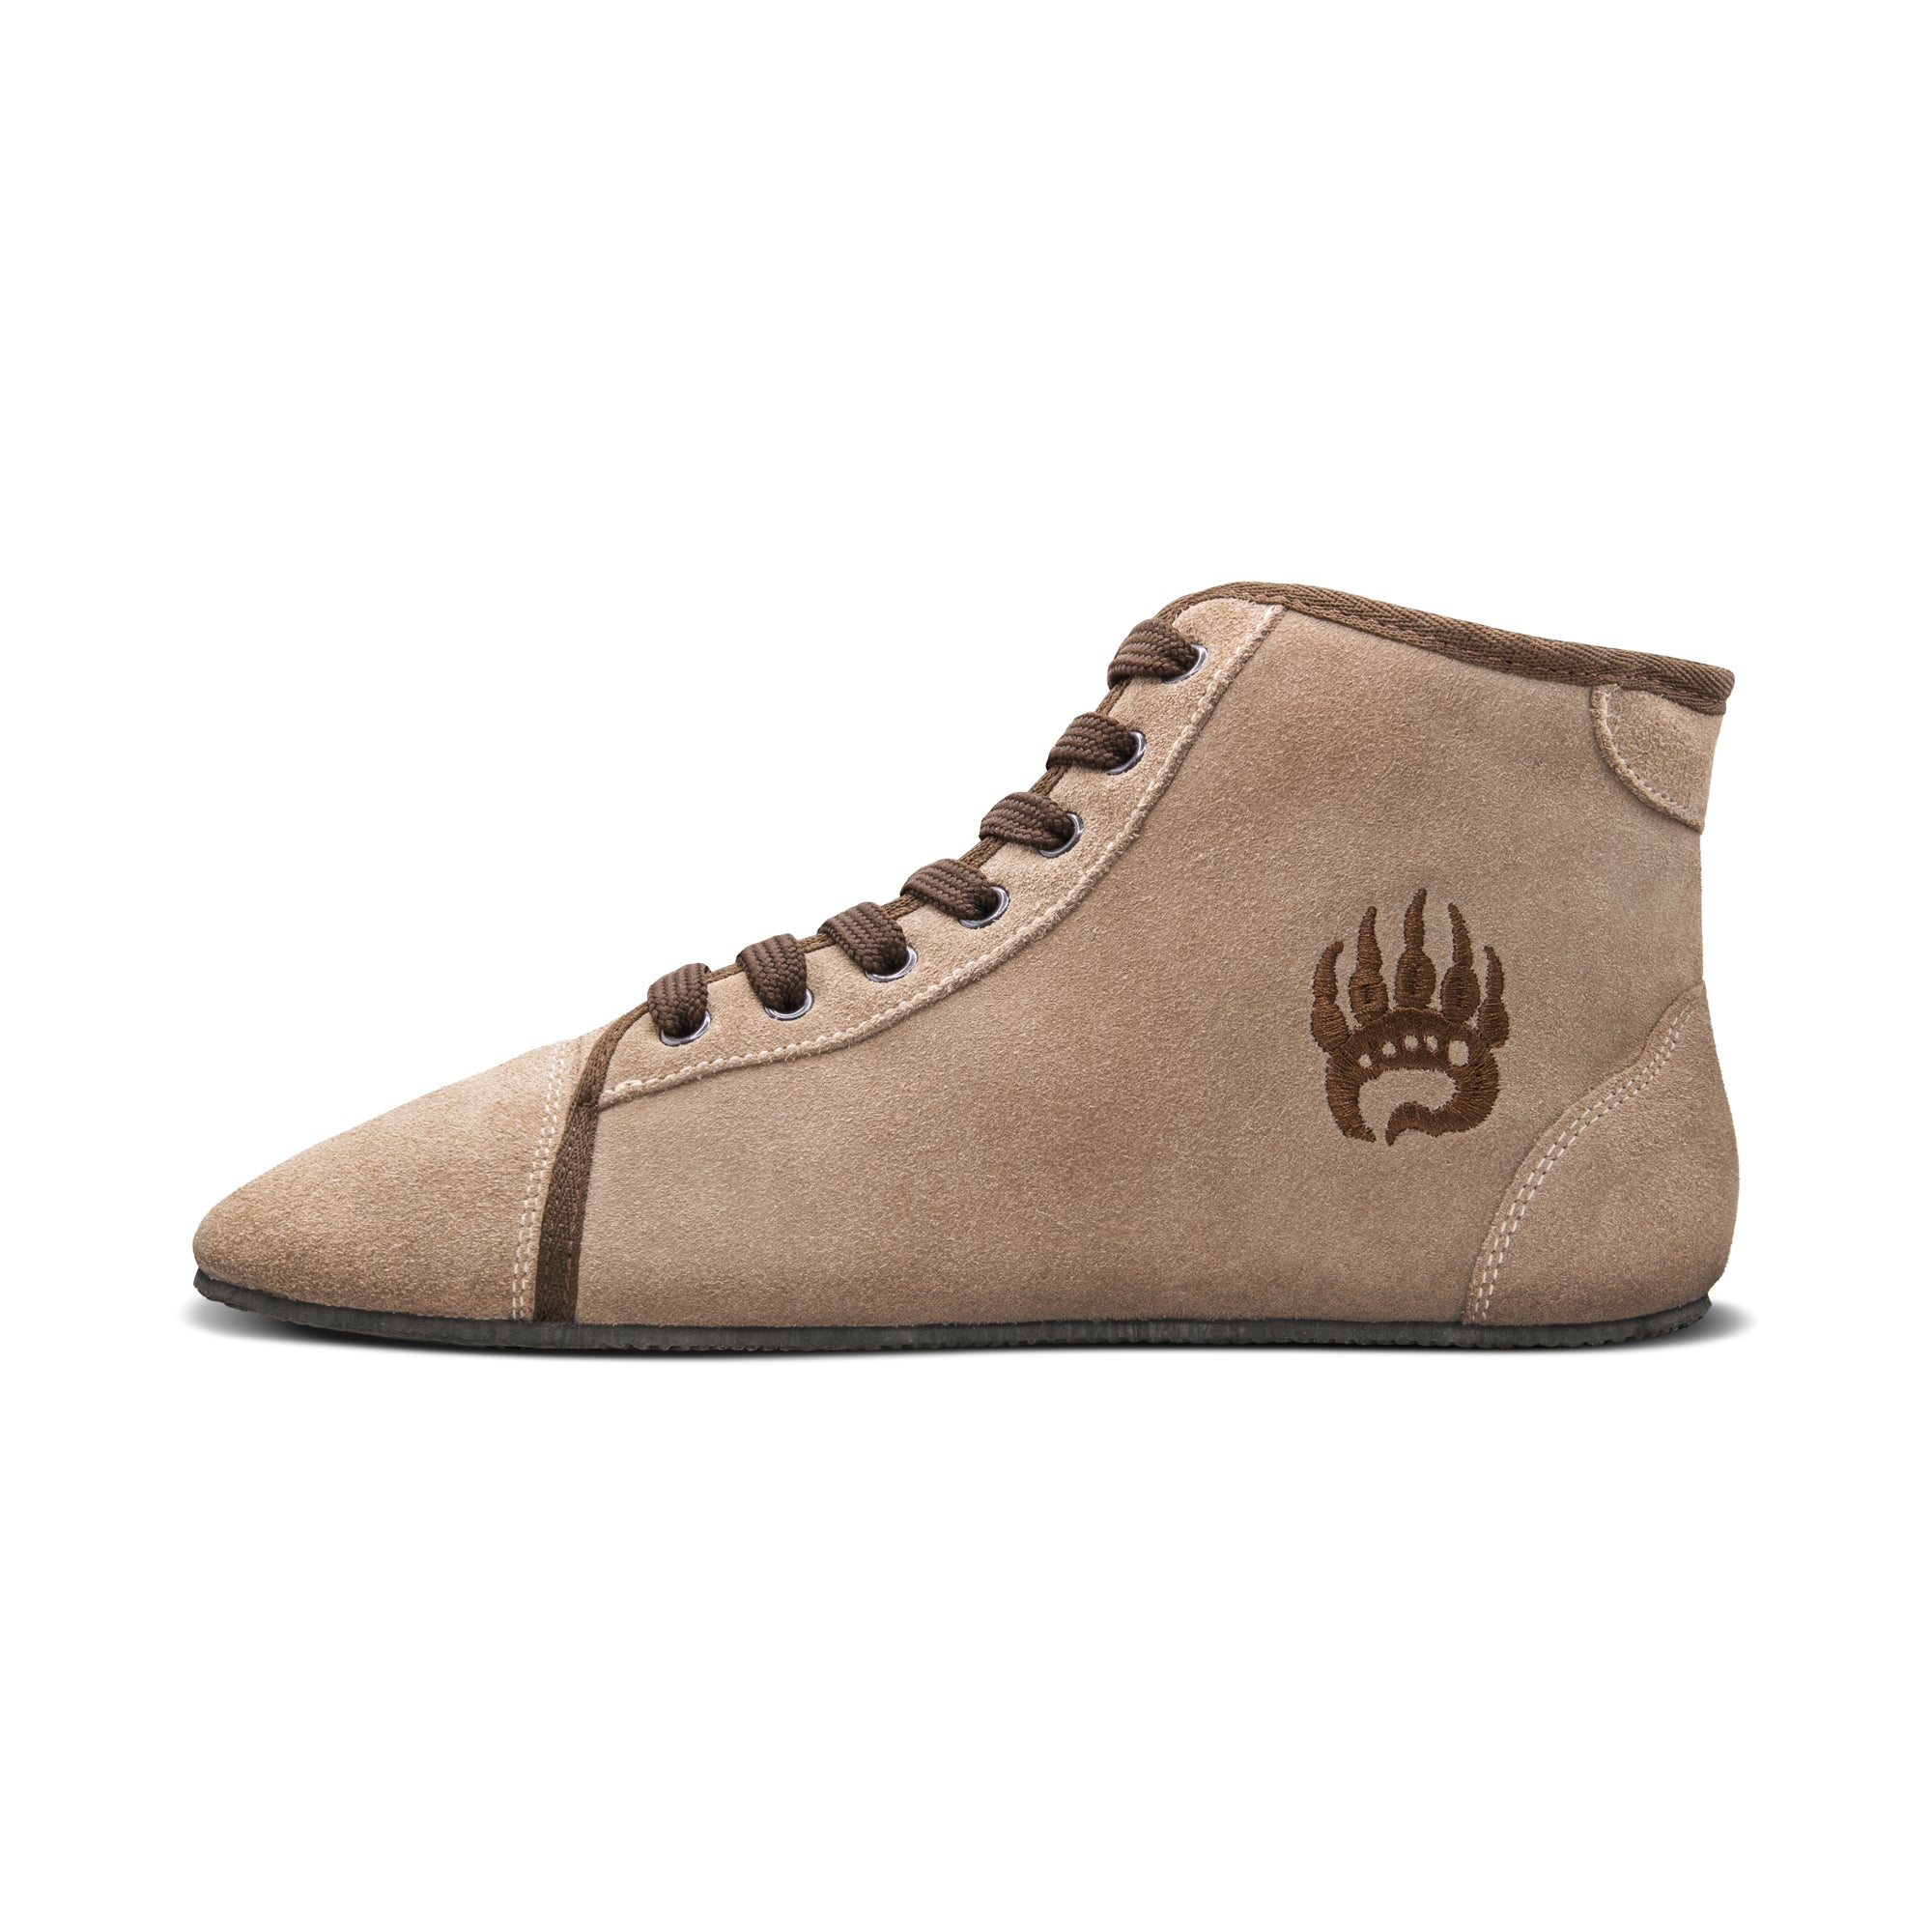 A beige Bearfoot Badland High-Top training sneaker with brown laces and a small brown bear paw logo on the side.